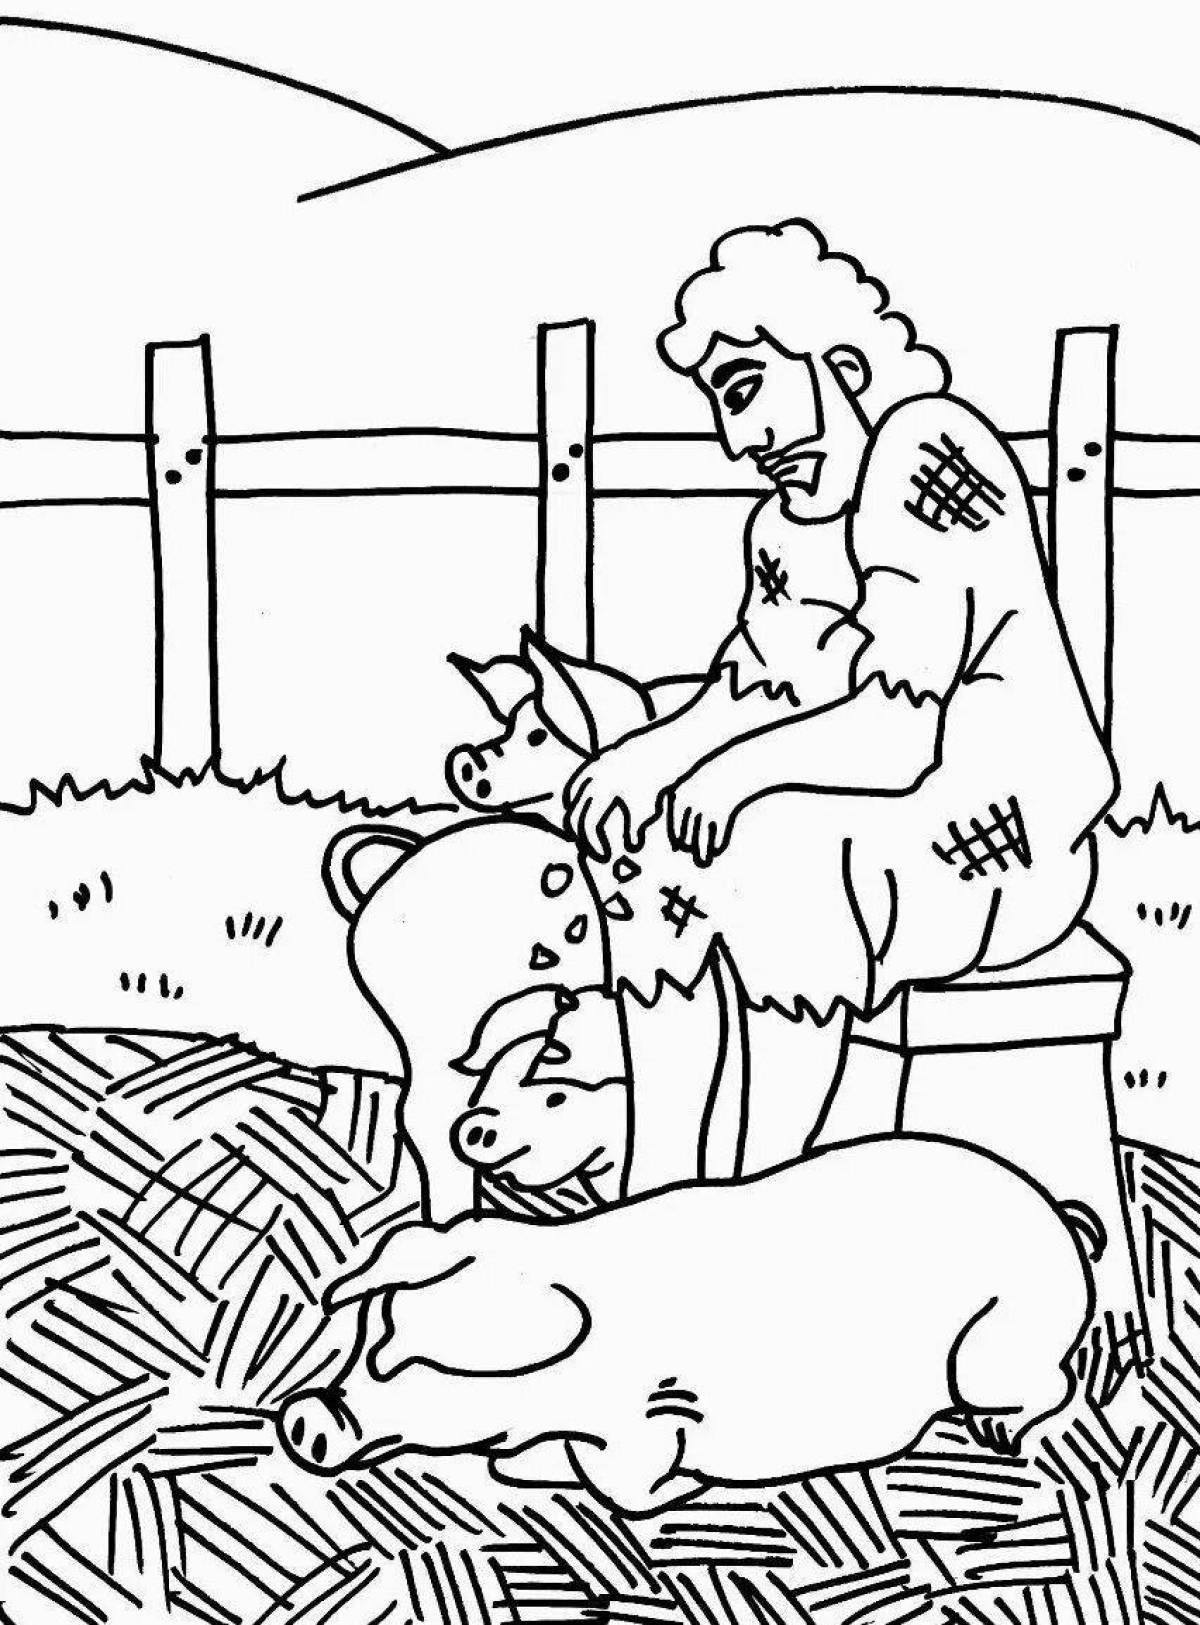 Bright prodigal son coloring page